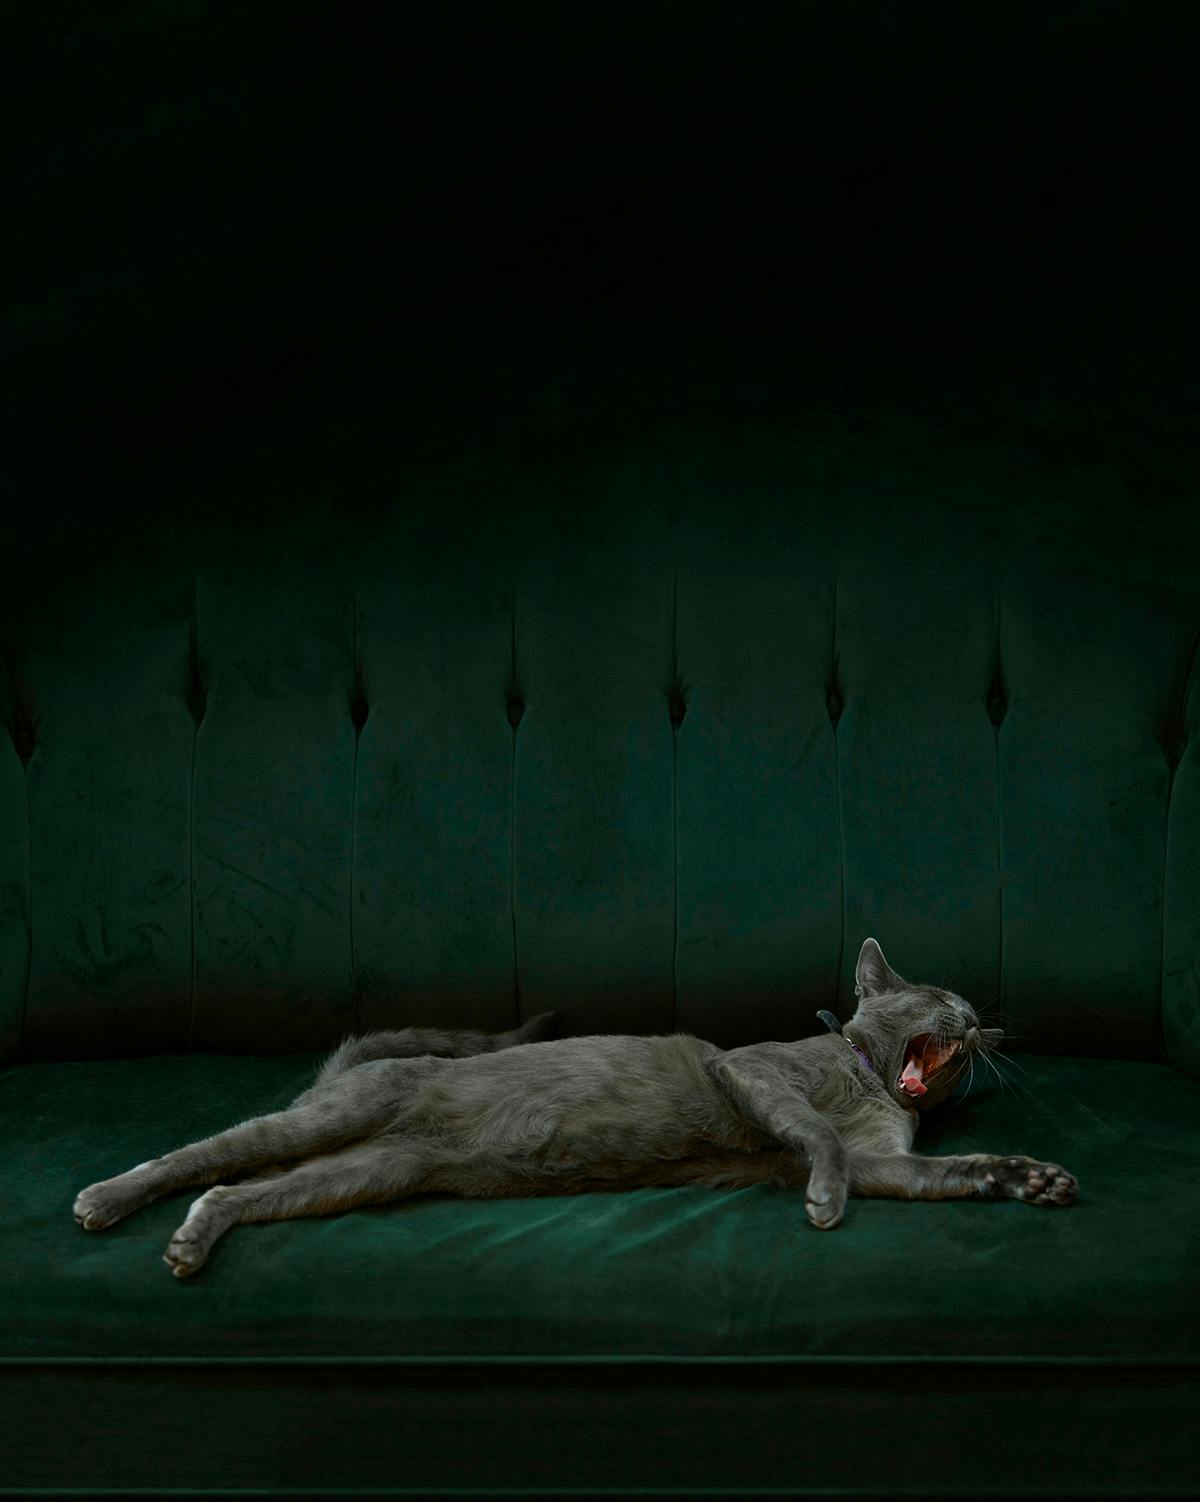 Photograph of a grey cat yawning on green seating by Hugh Fox